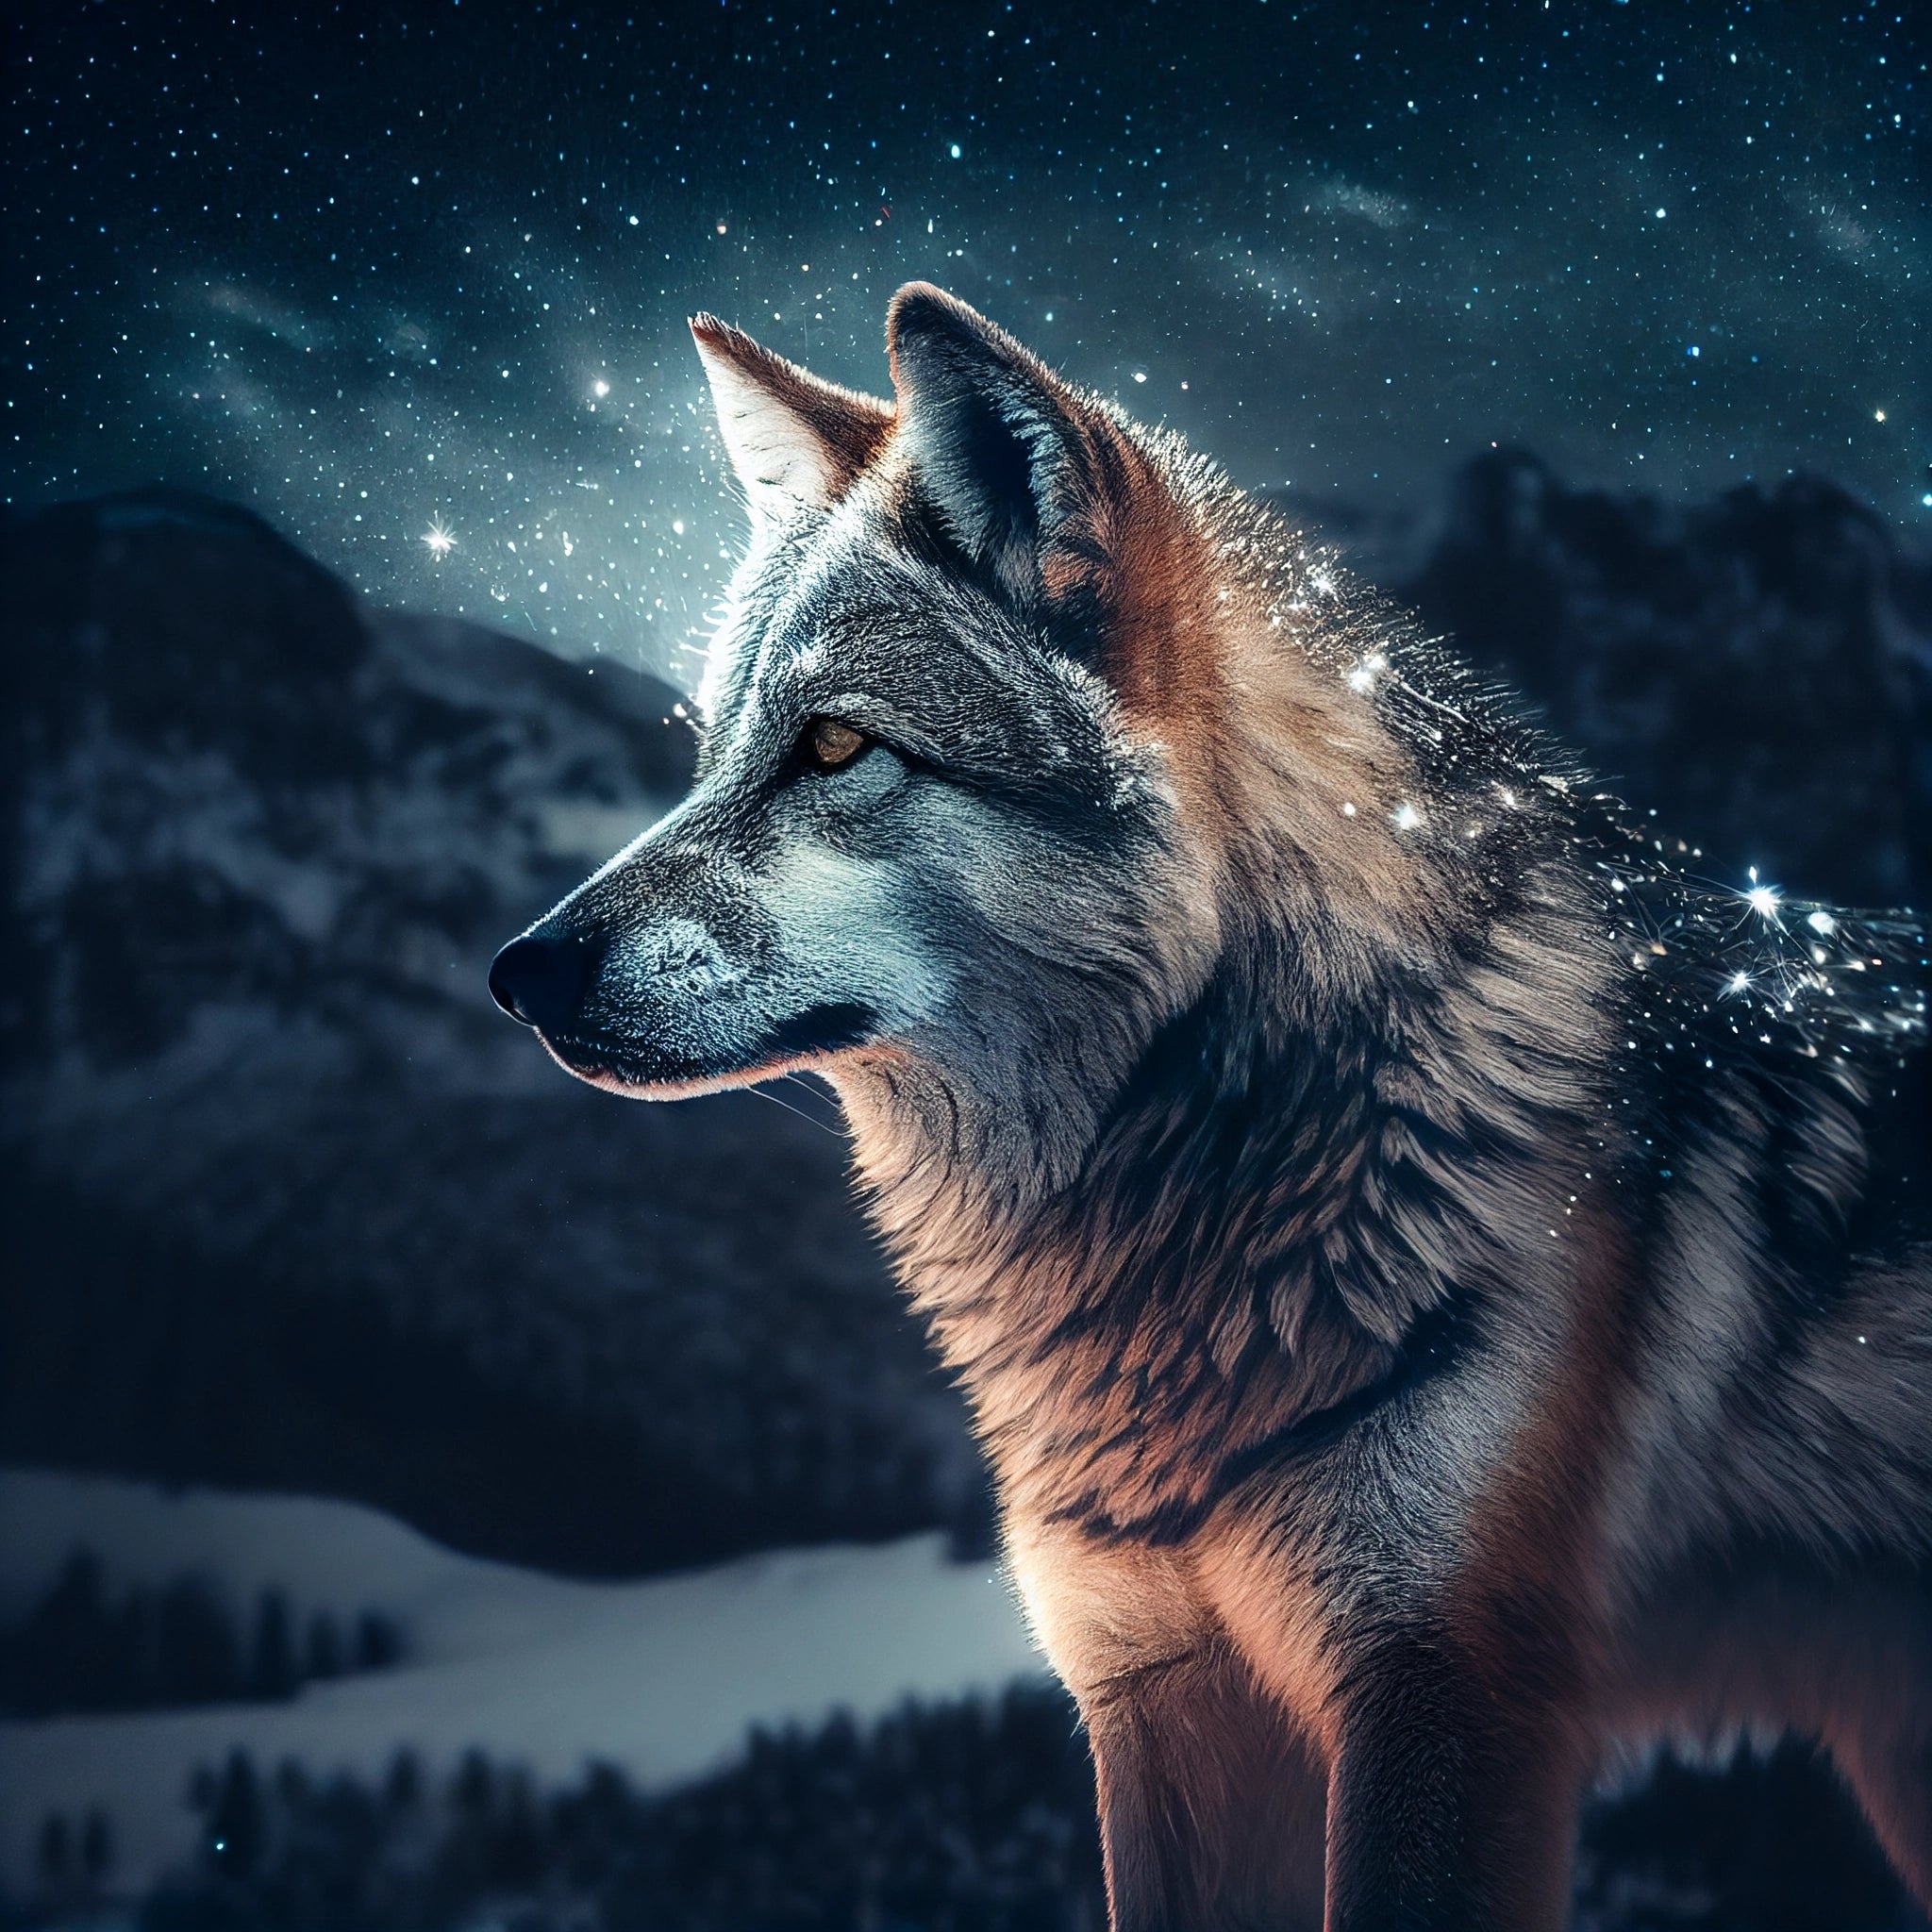 "Mystical Guardian: Digital Artwork Print of a Wolf with Magical Background"